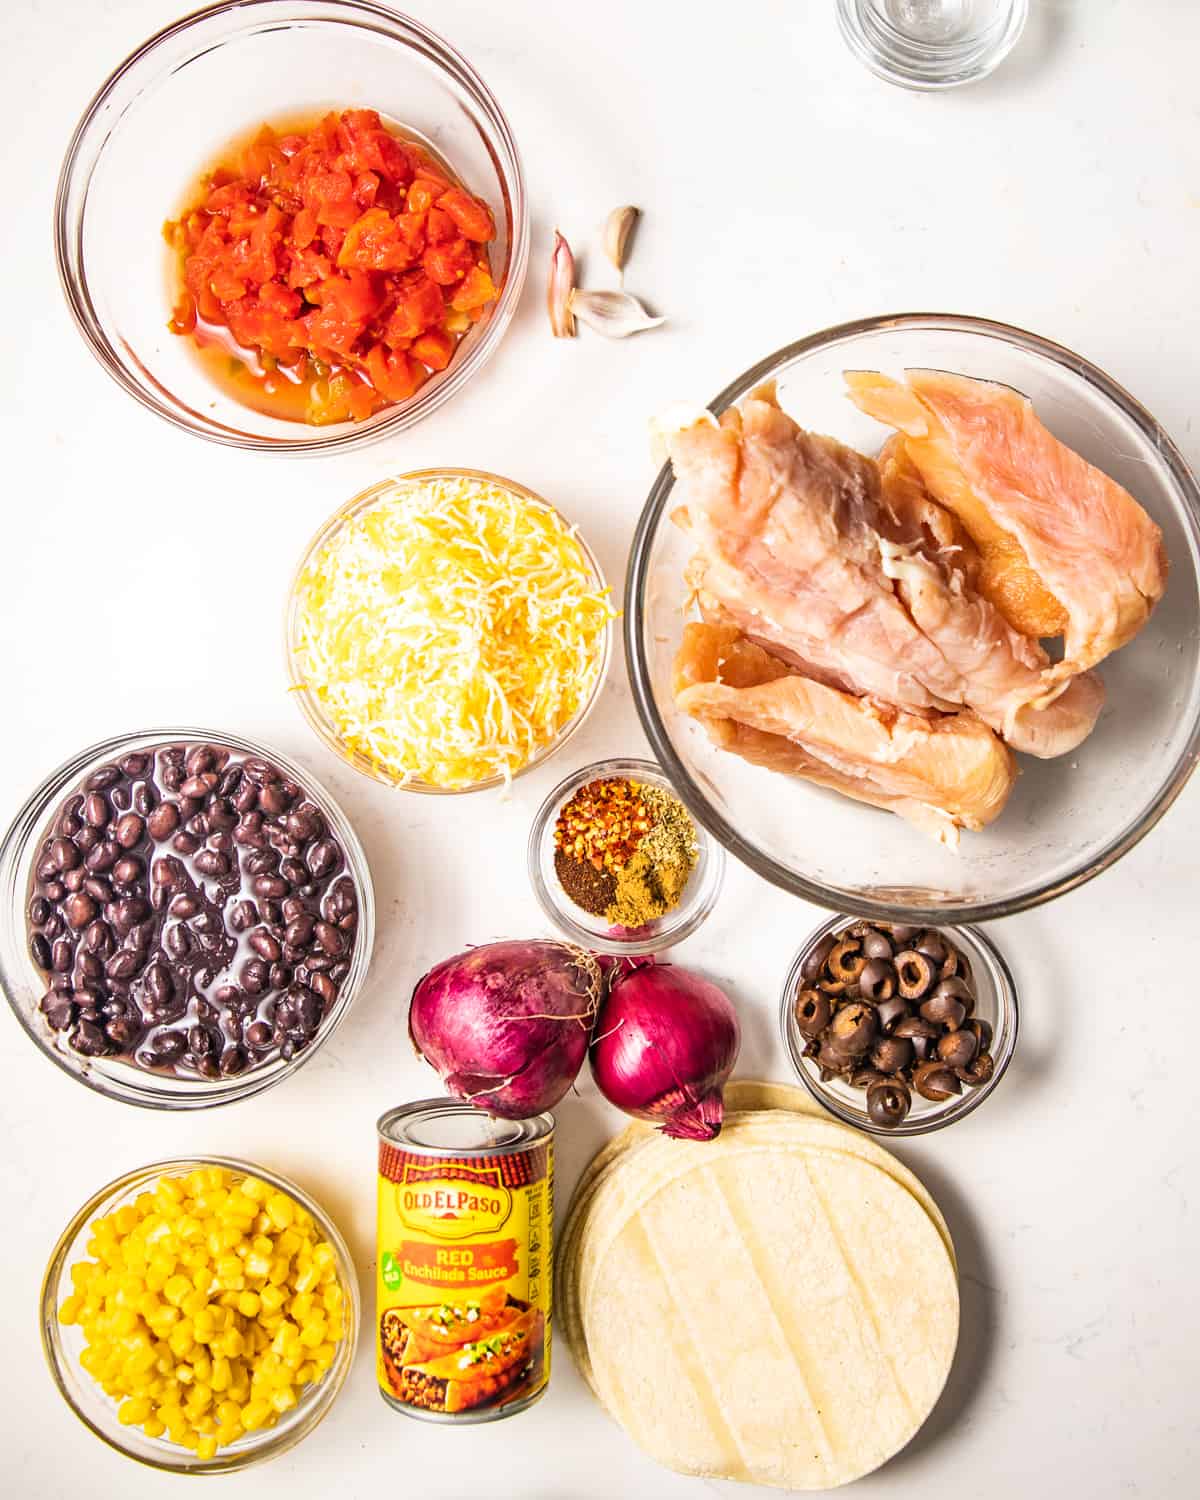 Ingredients to make chicken enchiladas - tomatoes, chicken, red onion, black beans, corn, seasonings, tortillas, enchilada sauce, olives, and cheese.